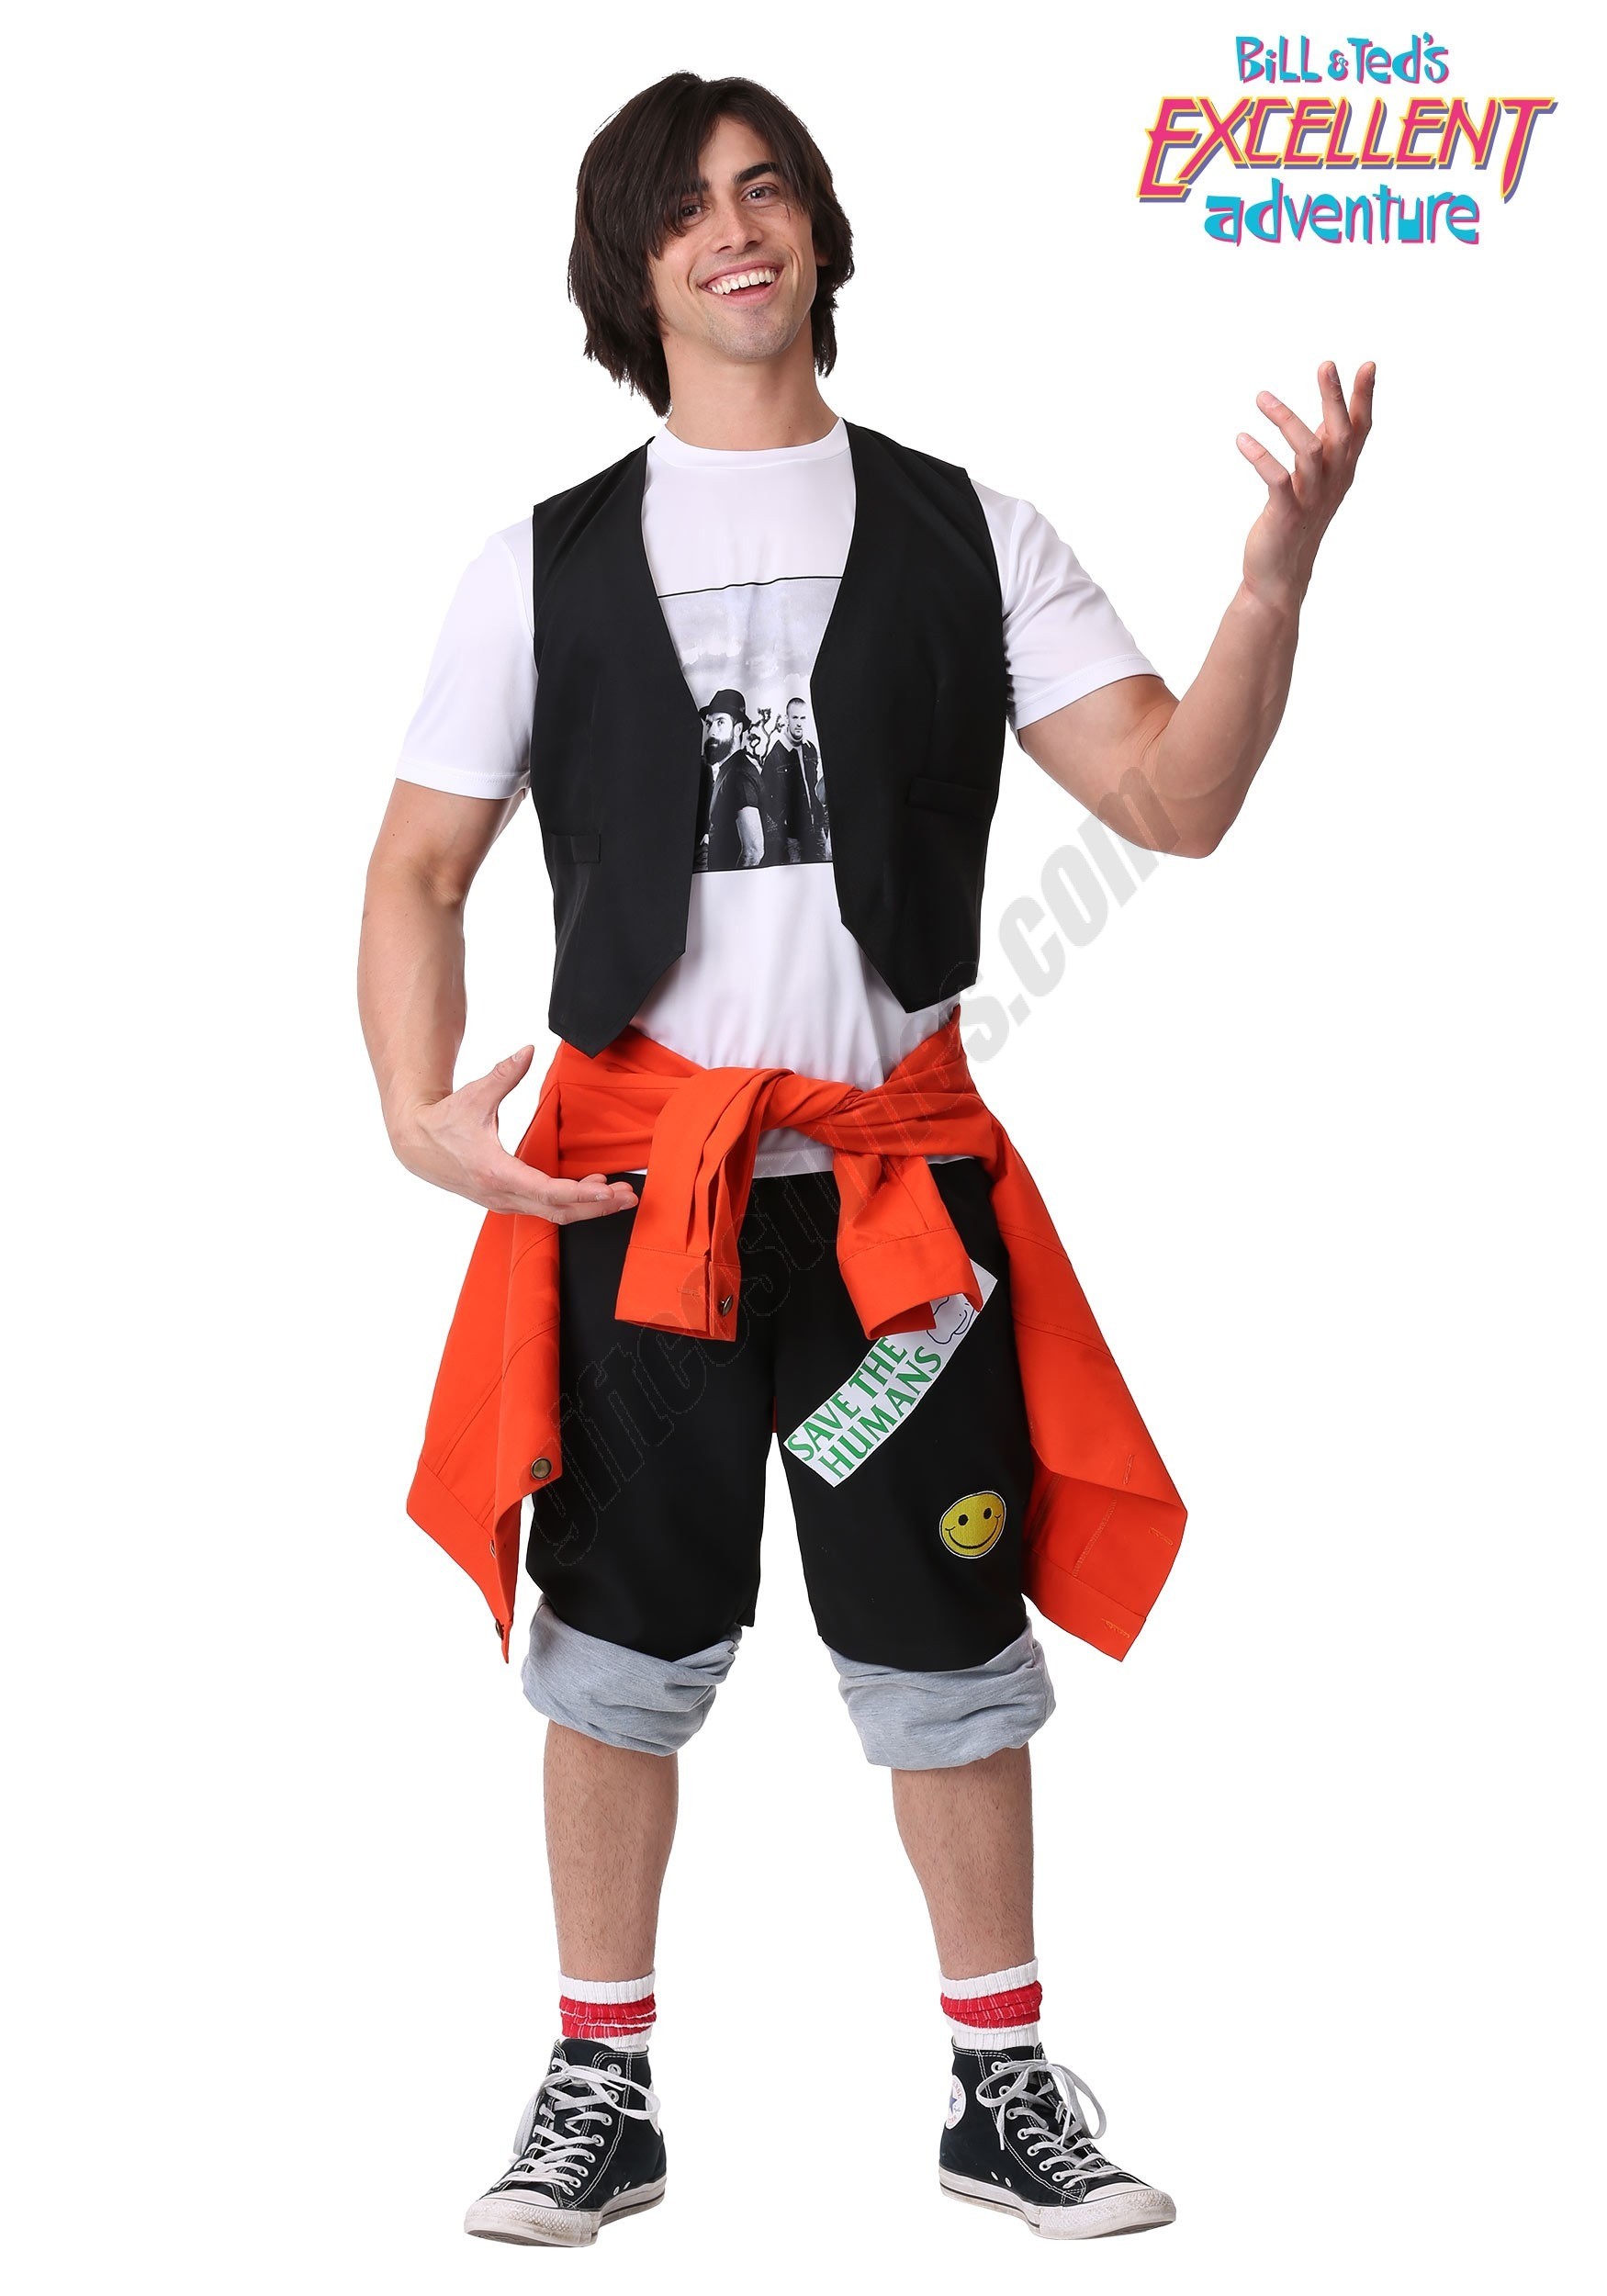 Bill & Ted's Excellent Adventure Ted Costume for Adults - Men's - Bill & Ted's Excellent Adventure Ted Costume for Adults - Men's